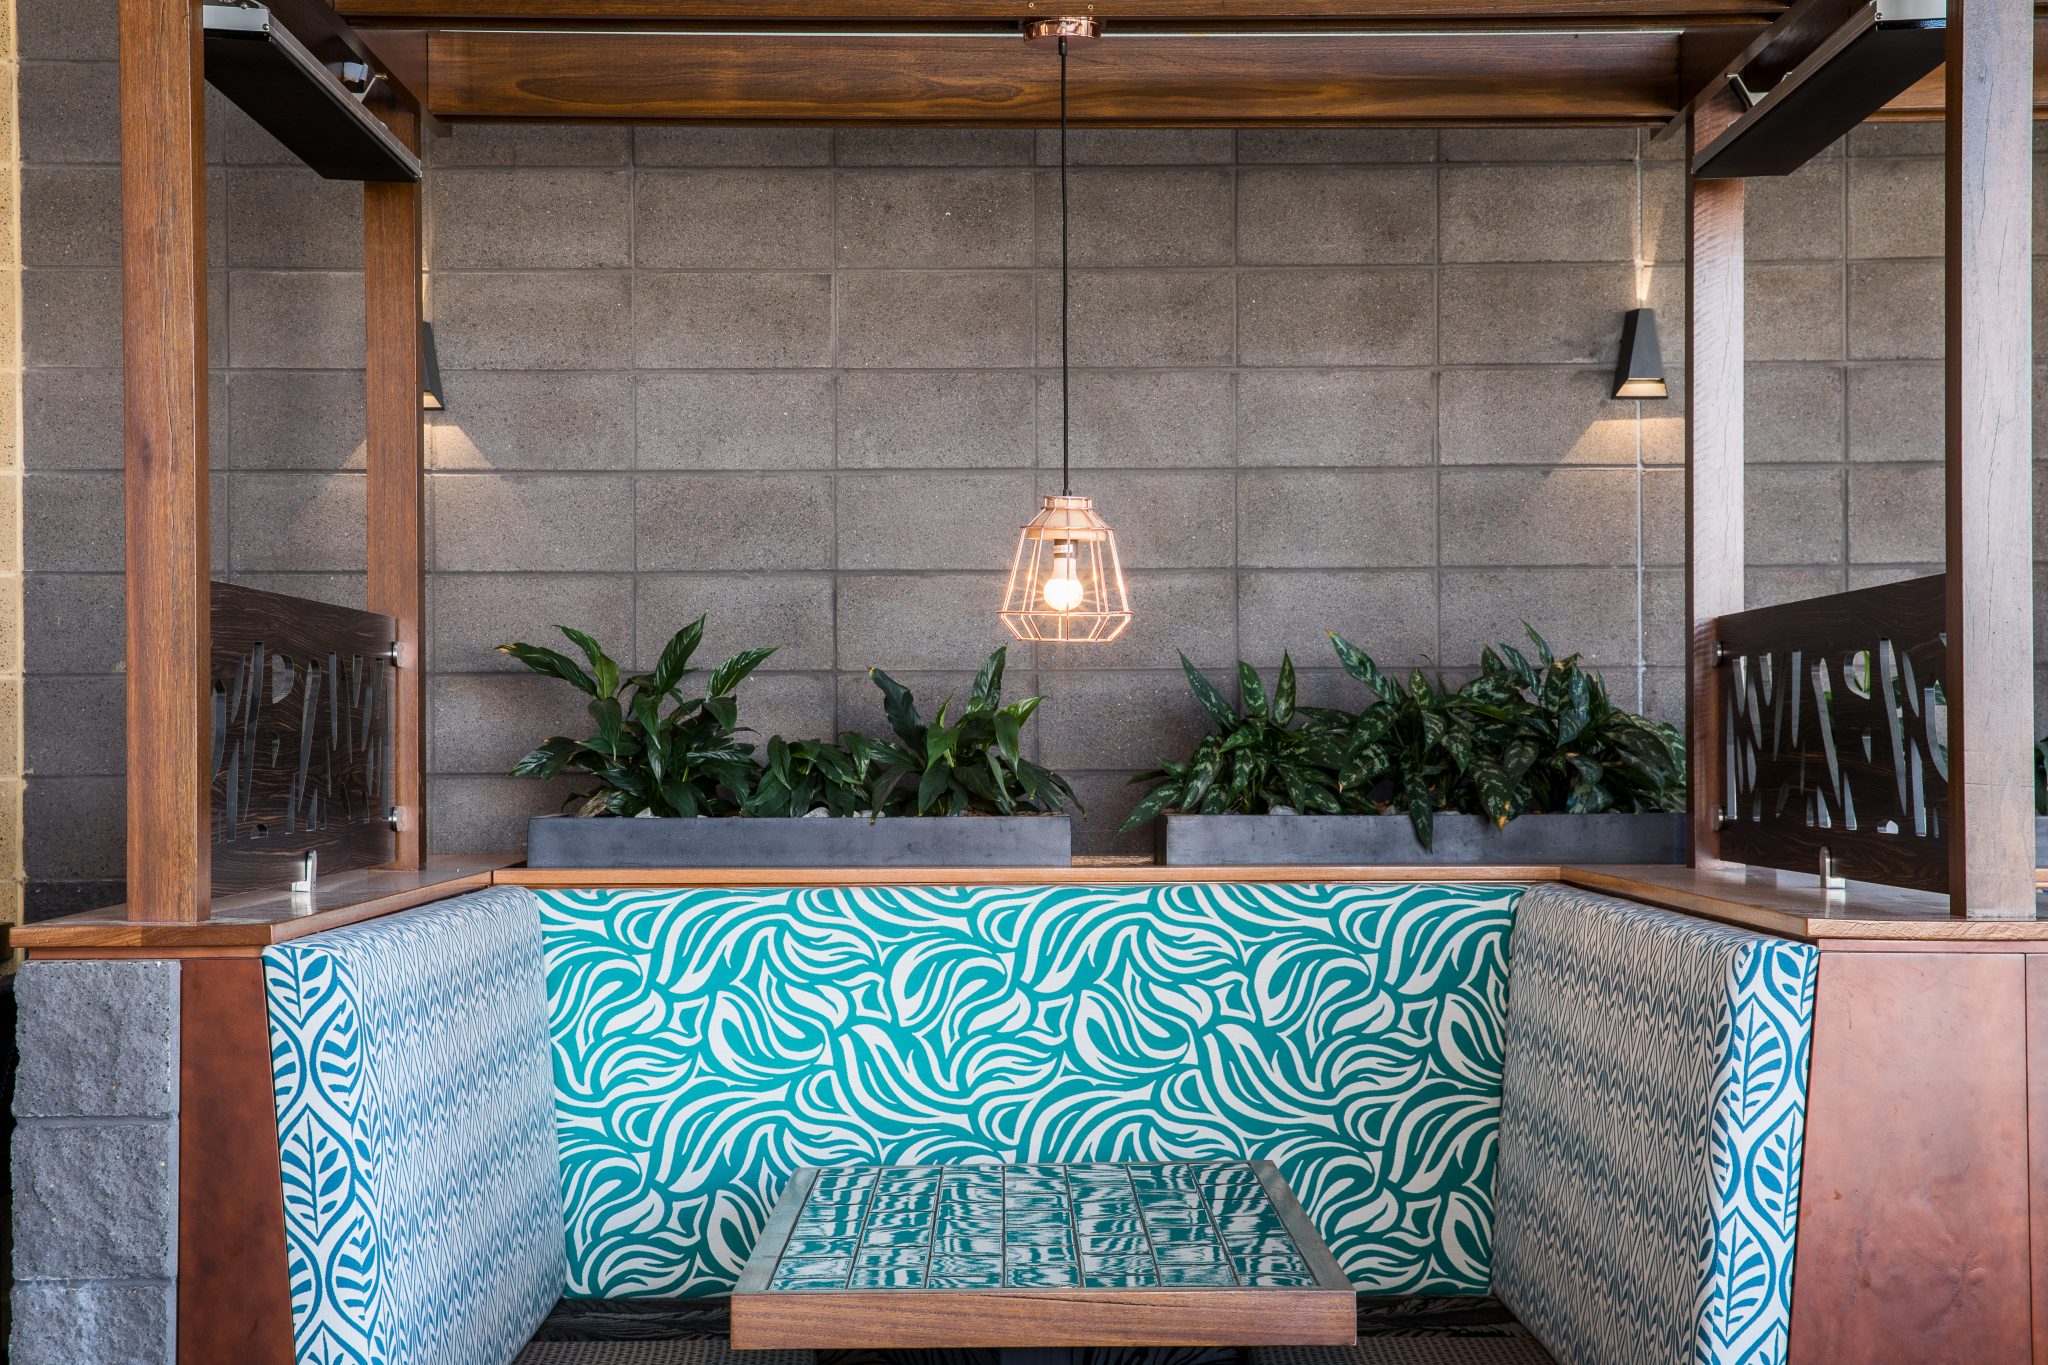 Modern_architectural_restaurant_featuring_smooth_charcoal_coloured_blockwork_with_timber_highlights_and_punches_of_colour_in_the_table_seating_and_surrounding_greenery